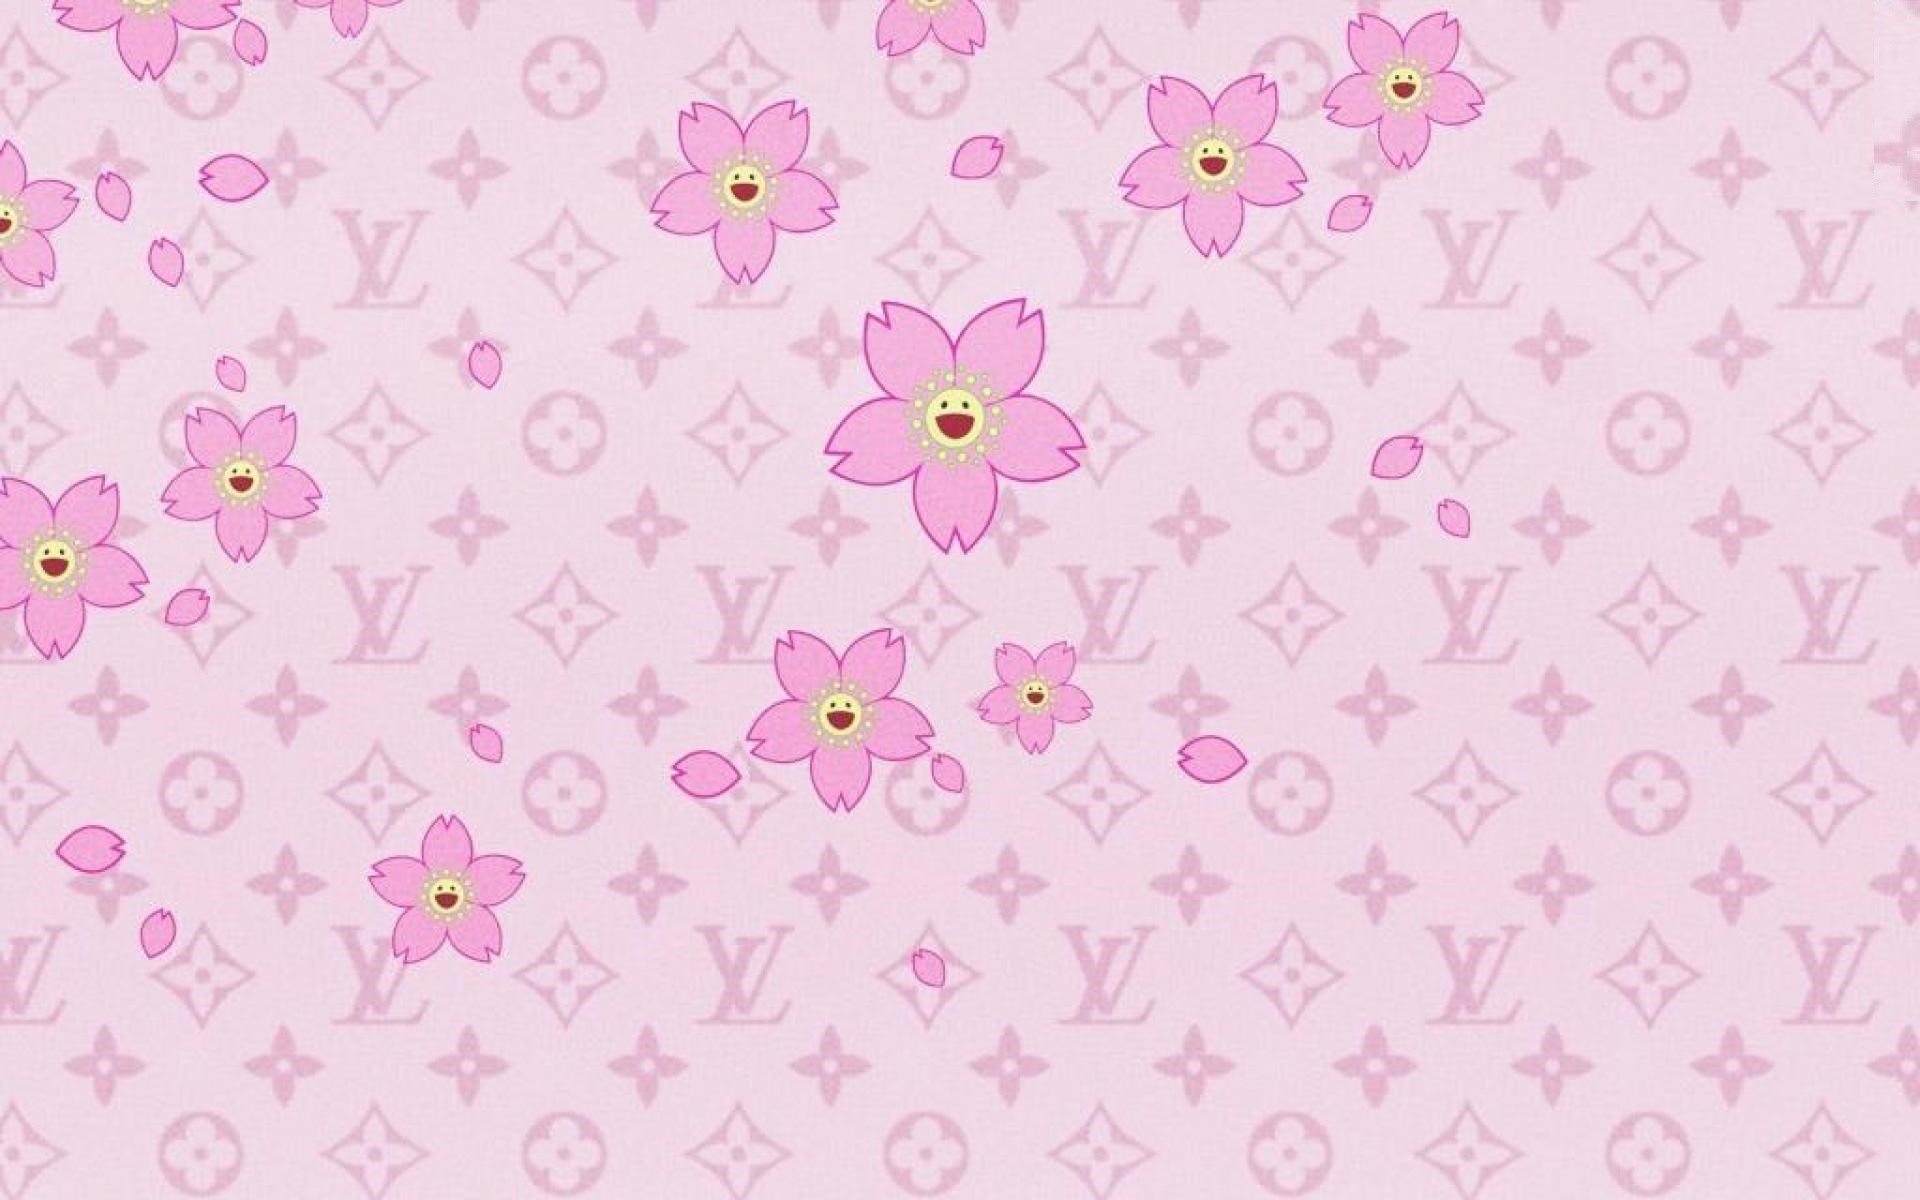 Louis Vuitton Wallpapers (74+ images)